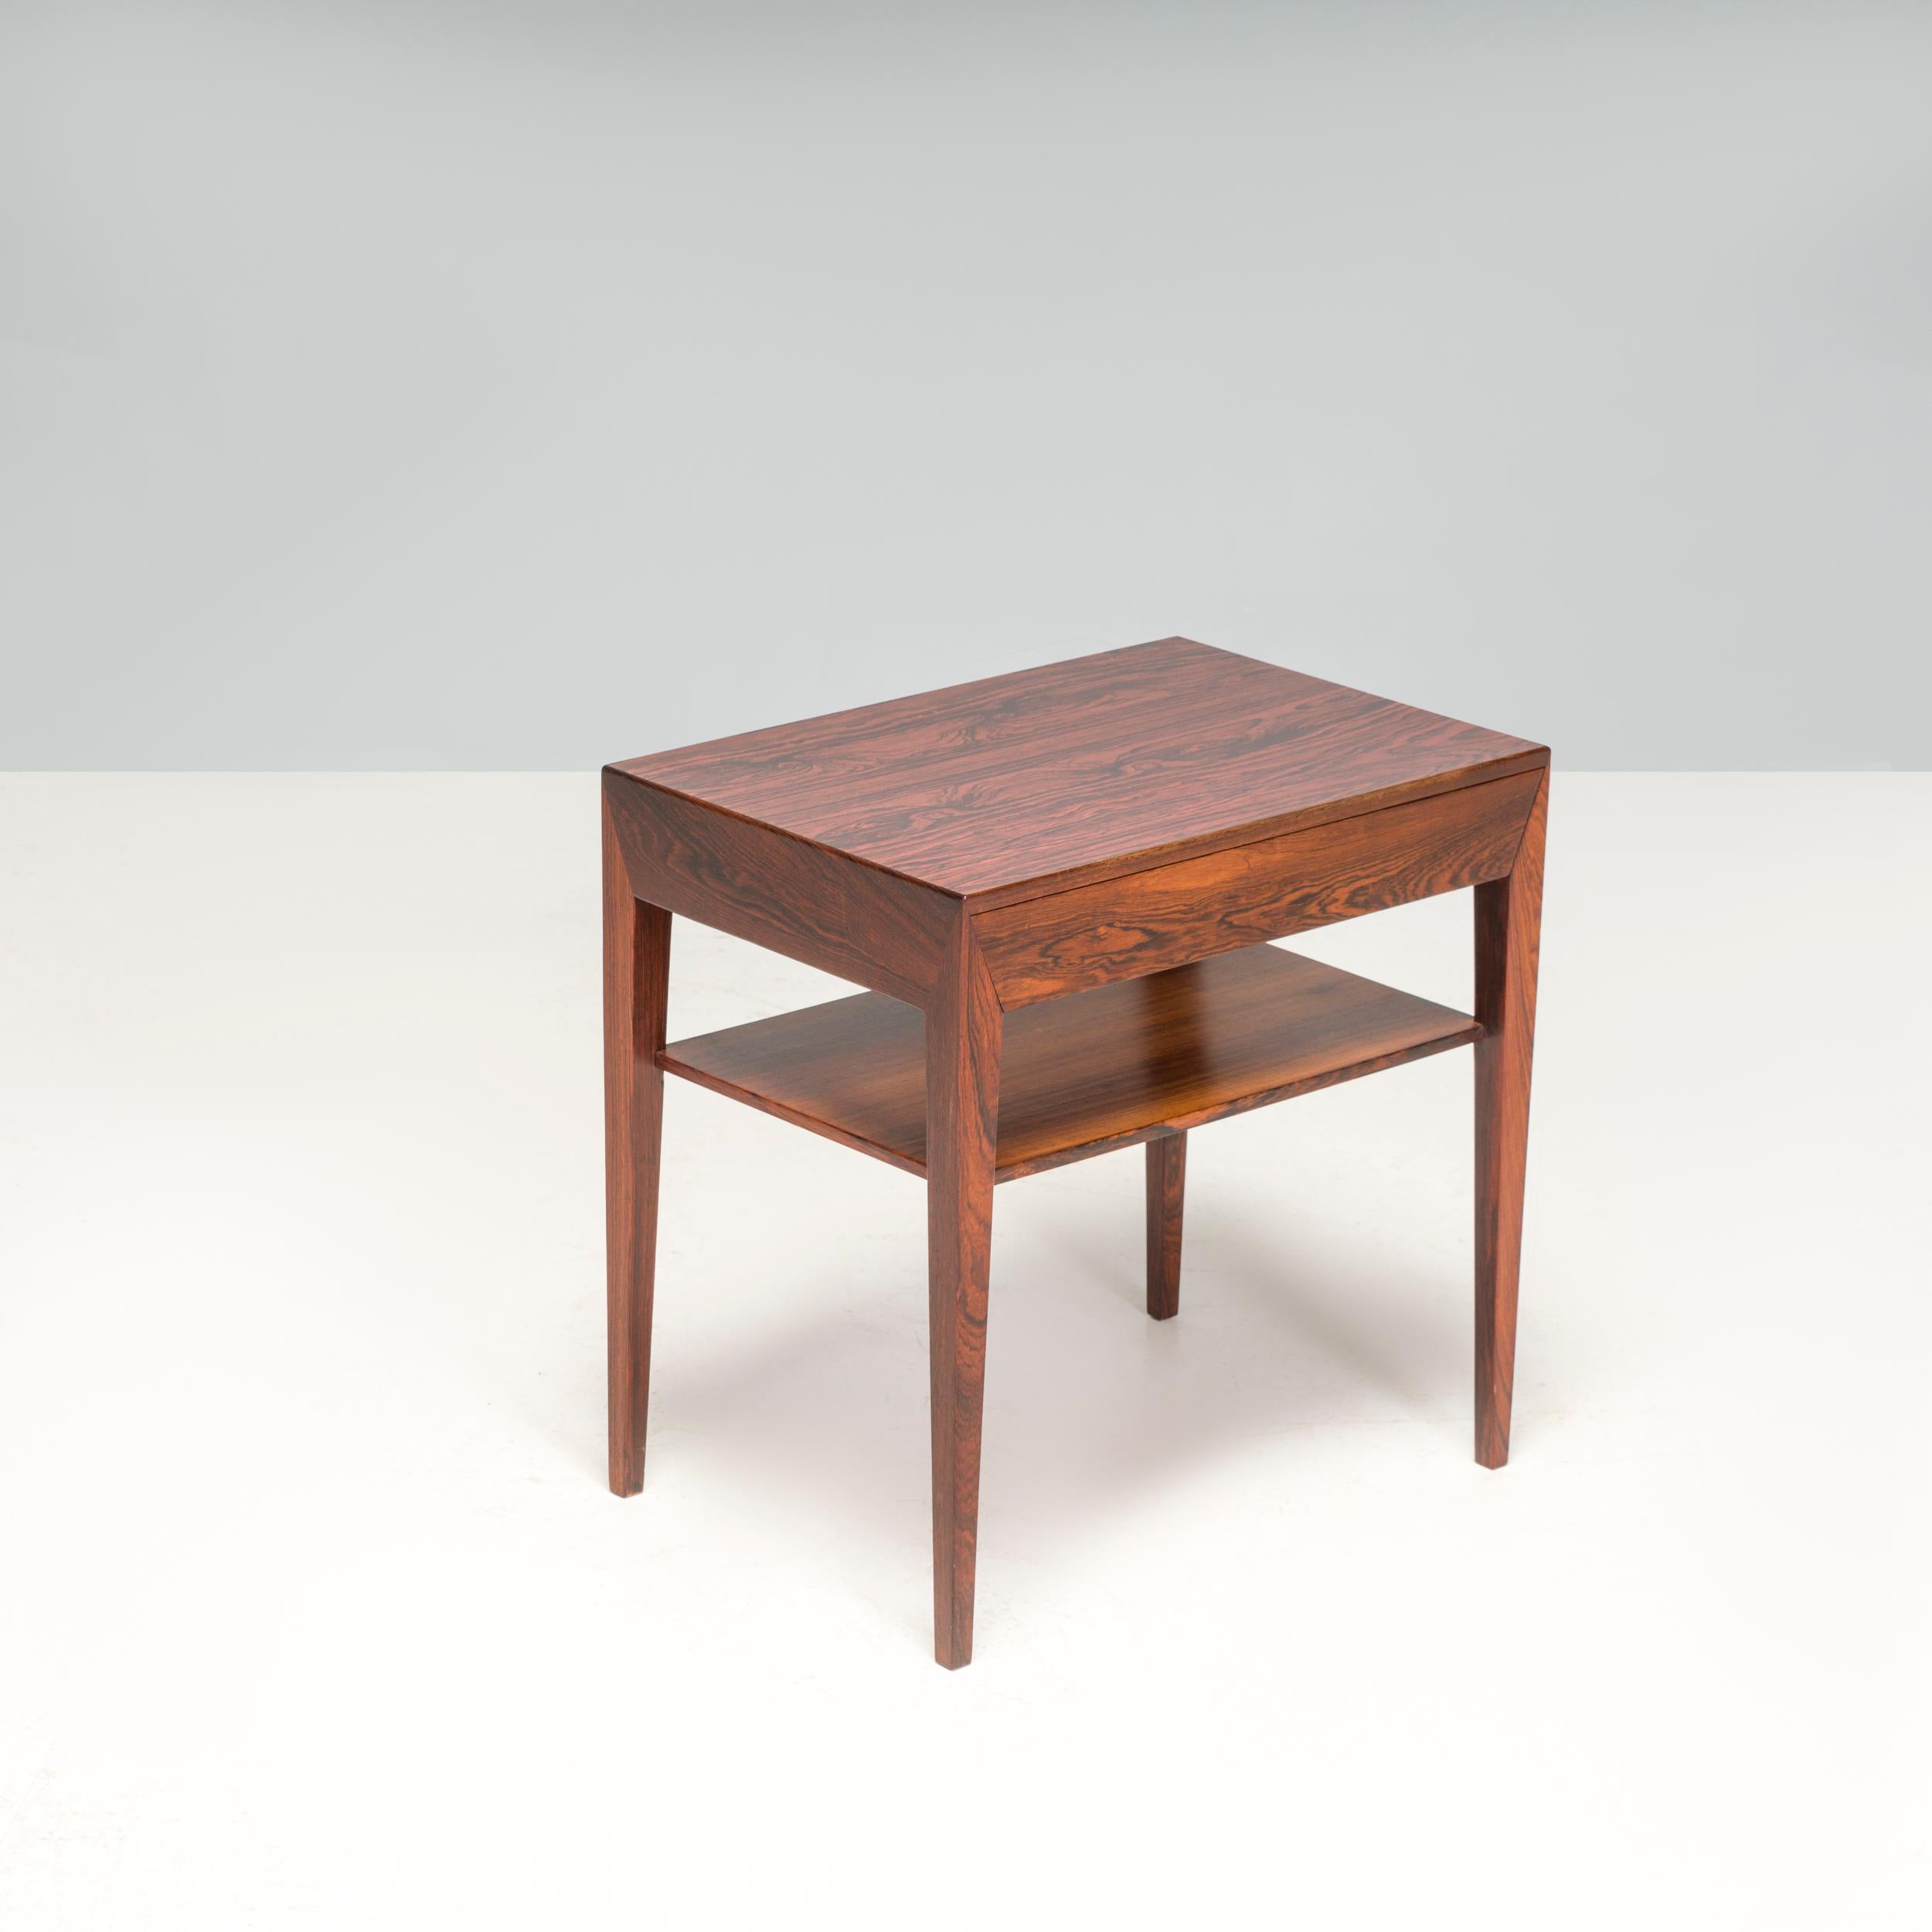 Highly figured rosewood bedside table with a single, oak-lined drawer and a shelf beneath. Produced by Haslev Mobelsnedkeri, Denmark c1960s. 
It can be used as a nightstand, bedside table or side table designed by Severin Hansen for Haslev